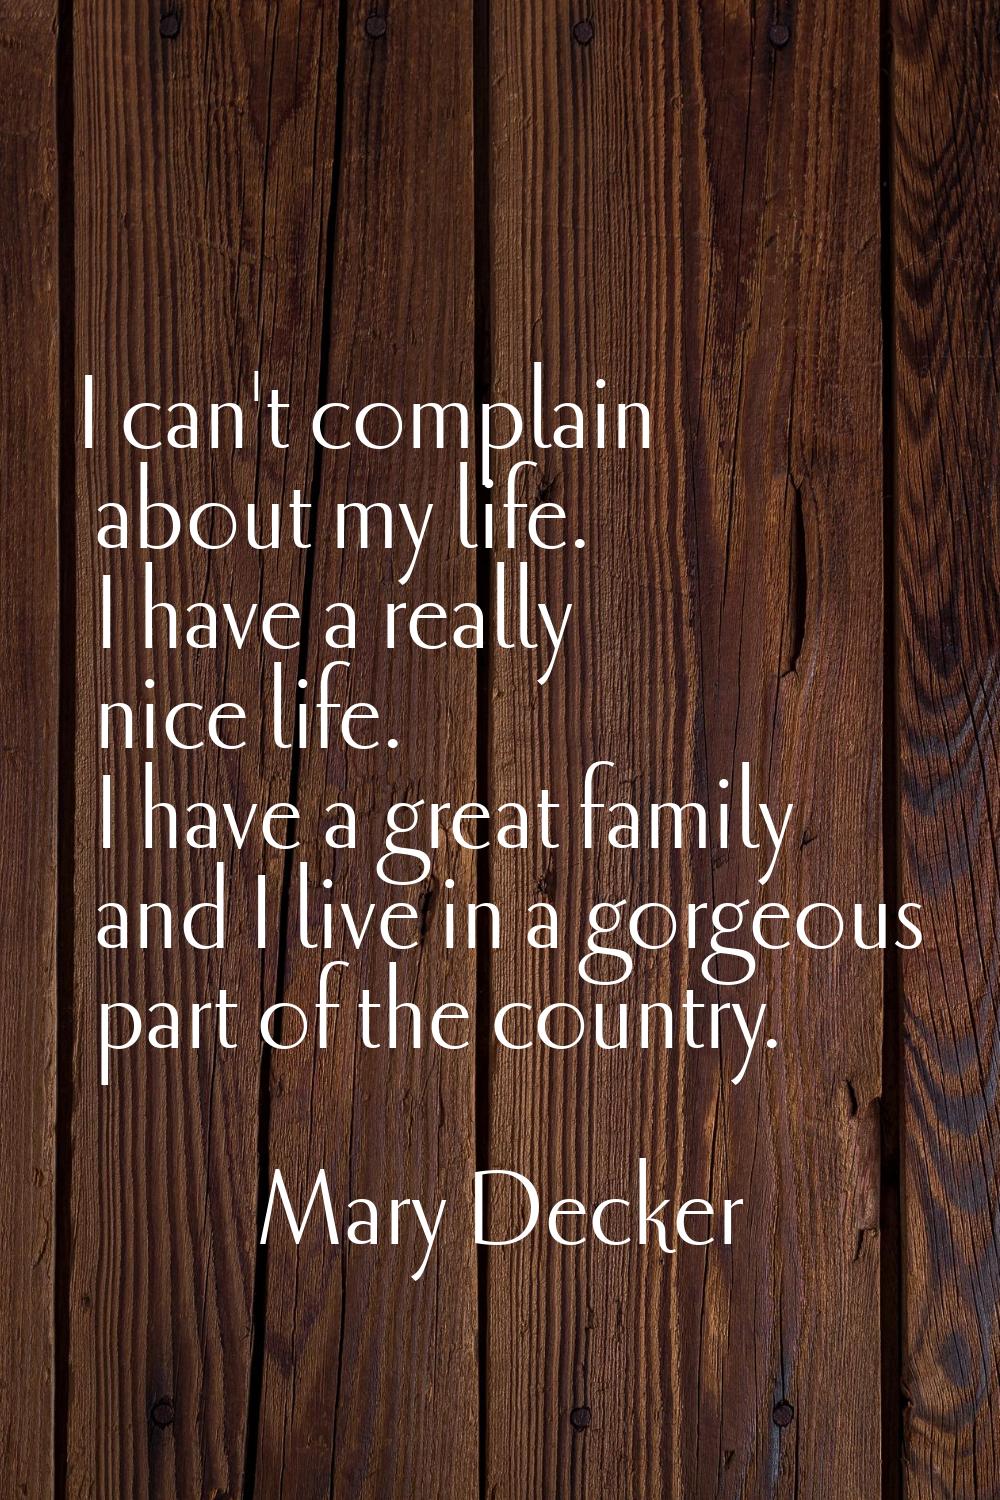 I can't complain about my life. I have a really nice life. I have a great family and I live in a go